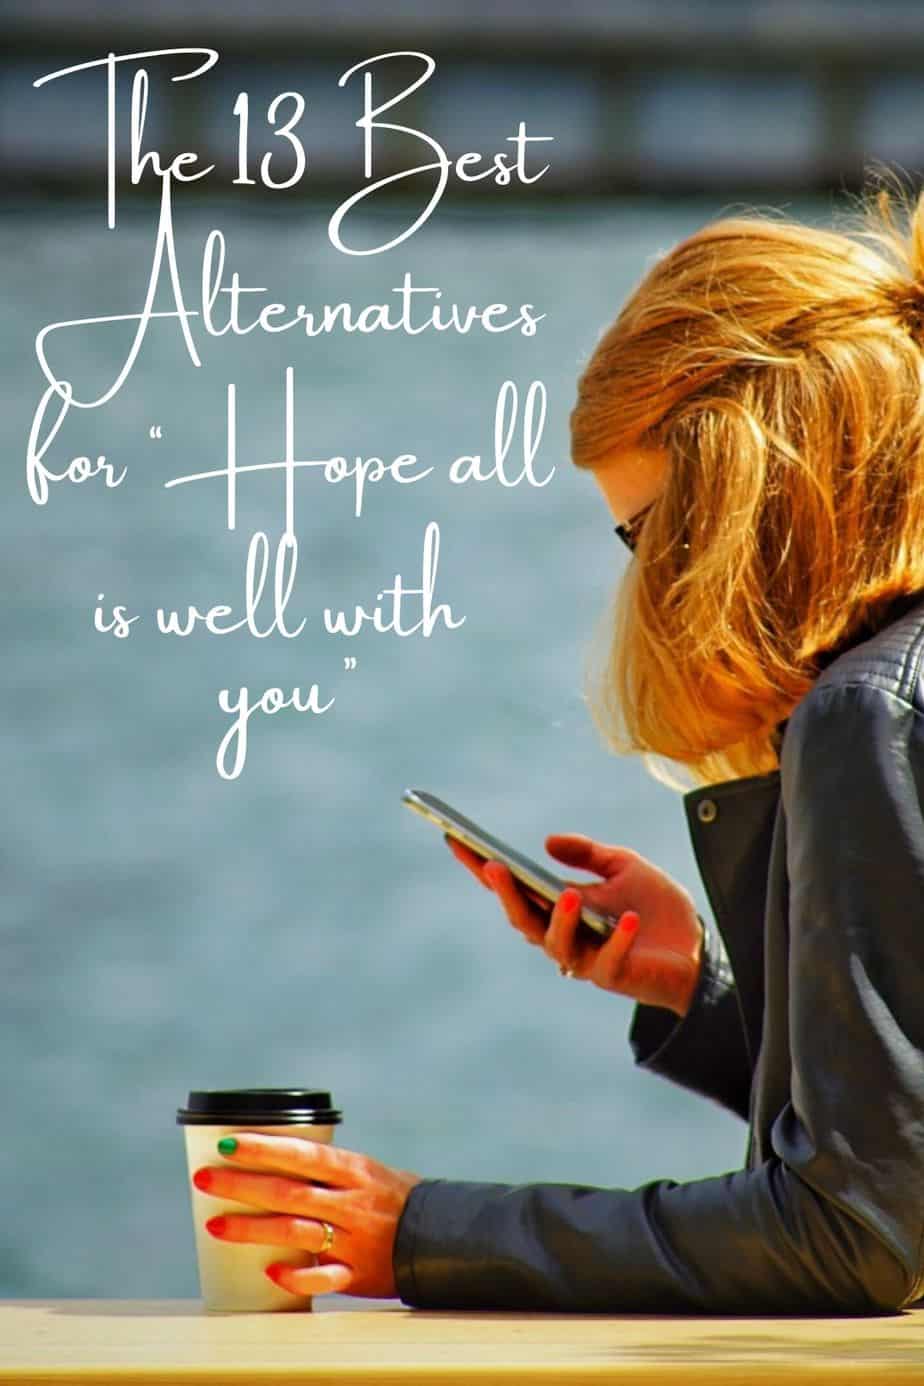 The 13 Best Alternatives for “Hope all is well with you”